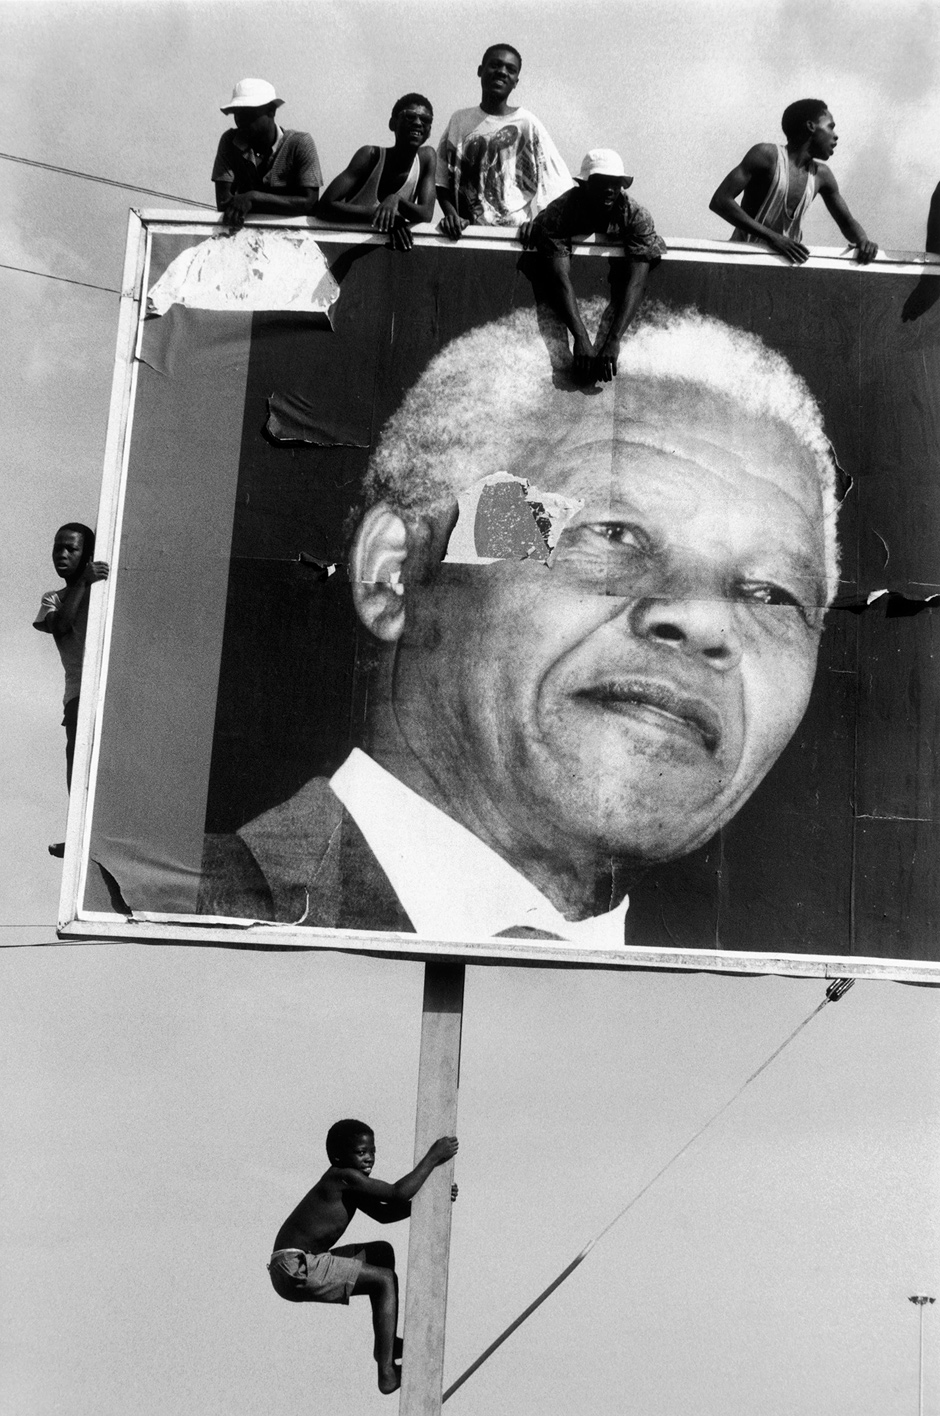 Supporters awaiting the arrival of Nelson Mandela, Lamontville, South Africa, 1994